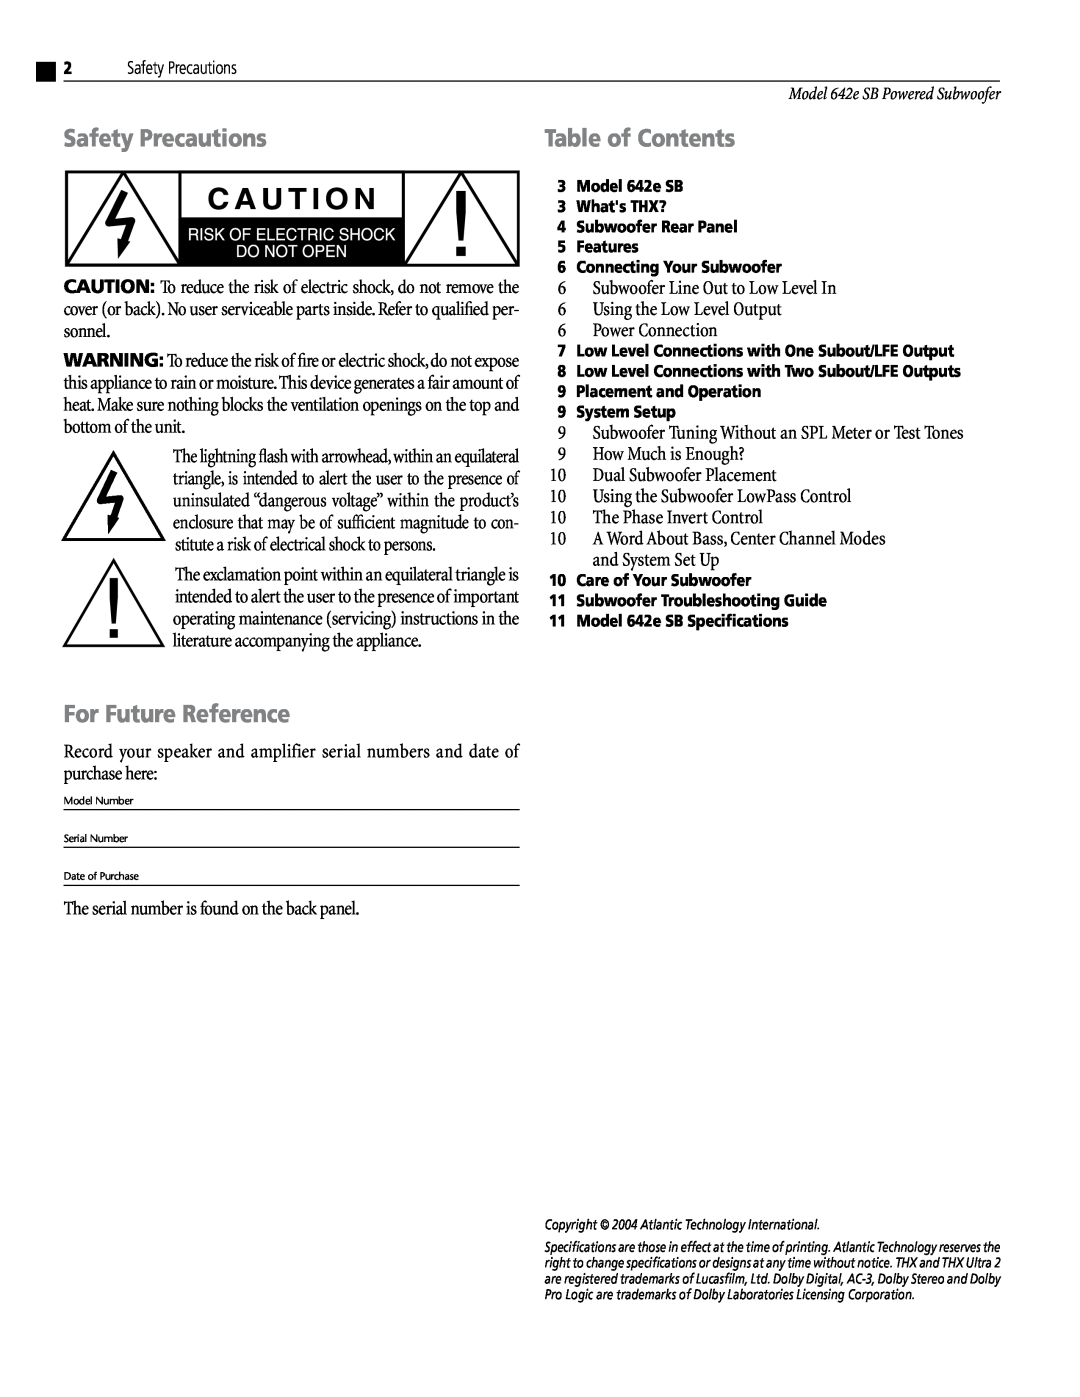 Atlantic Technology 642e SB instruction manual Safety Precautions, Table of Contents, For Future Reference 